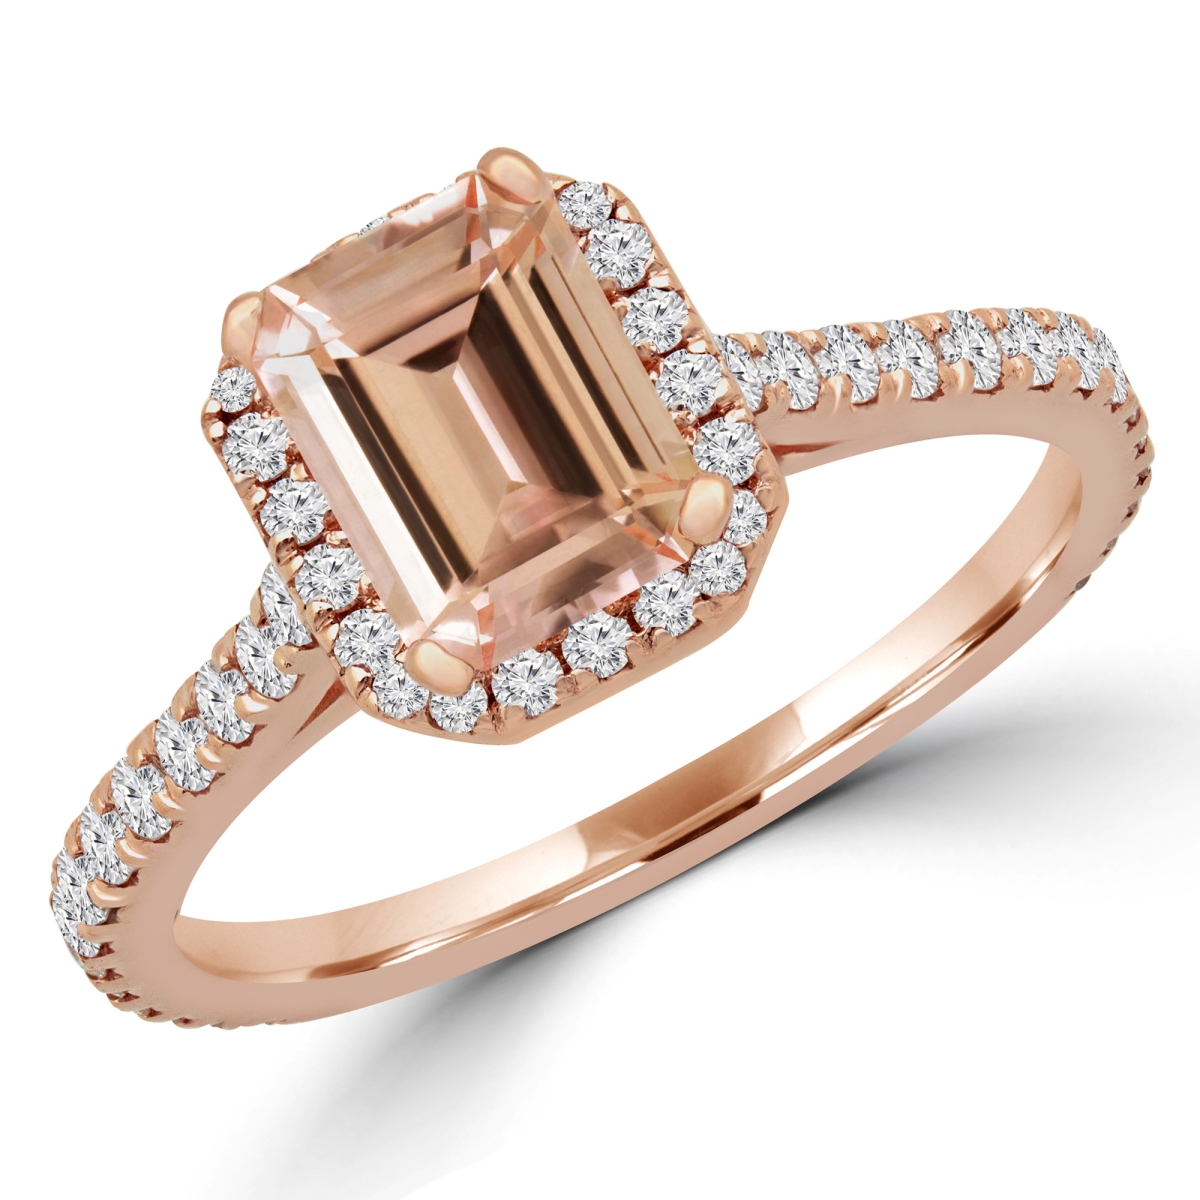 Picture of Majesty Diamonds MD180580-8 1.25 CTW Emerald Pink Morganite Halo Engagement Ring in 14K Rose Gold - Size 8